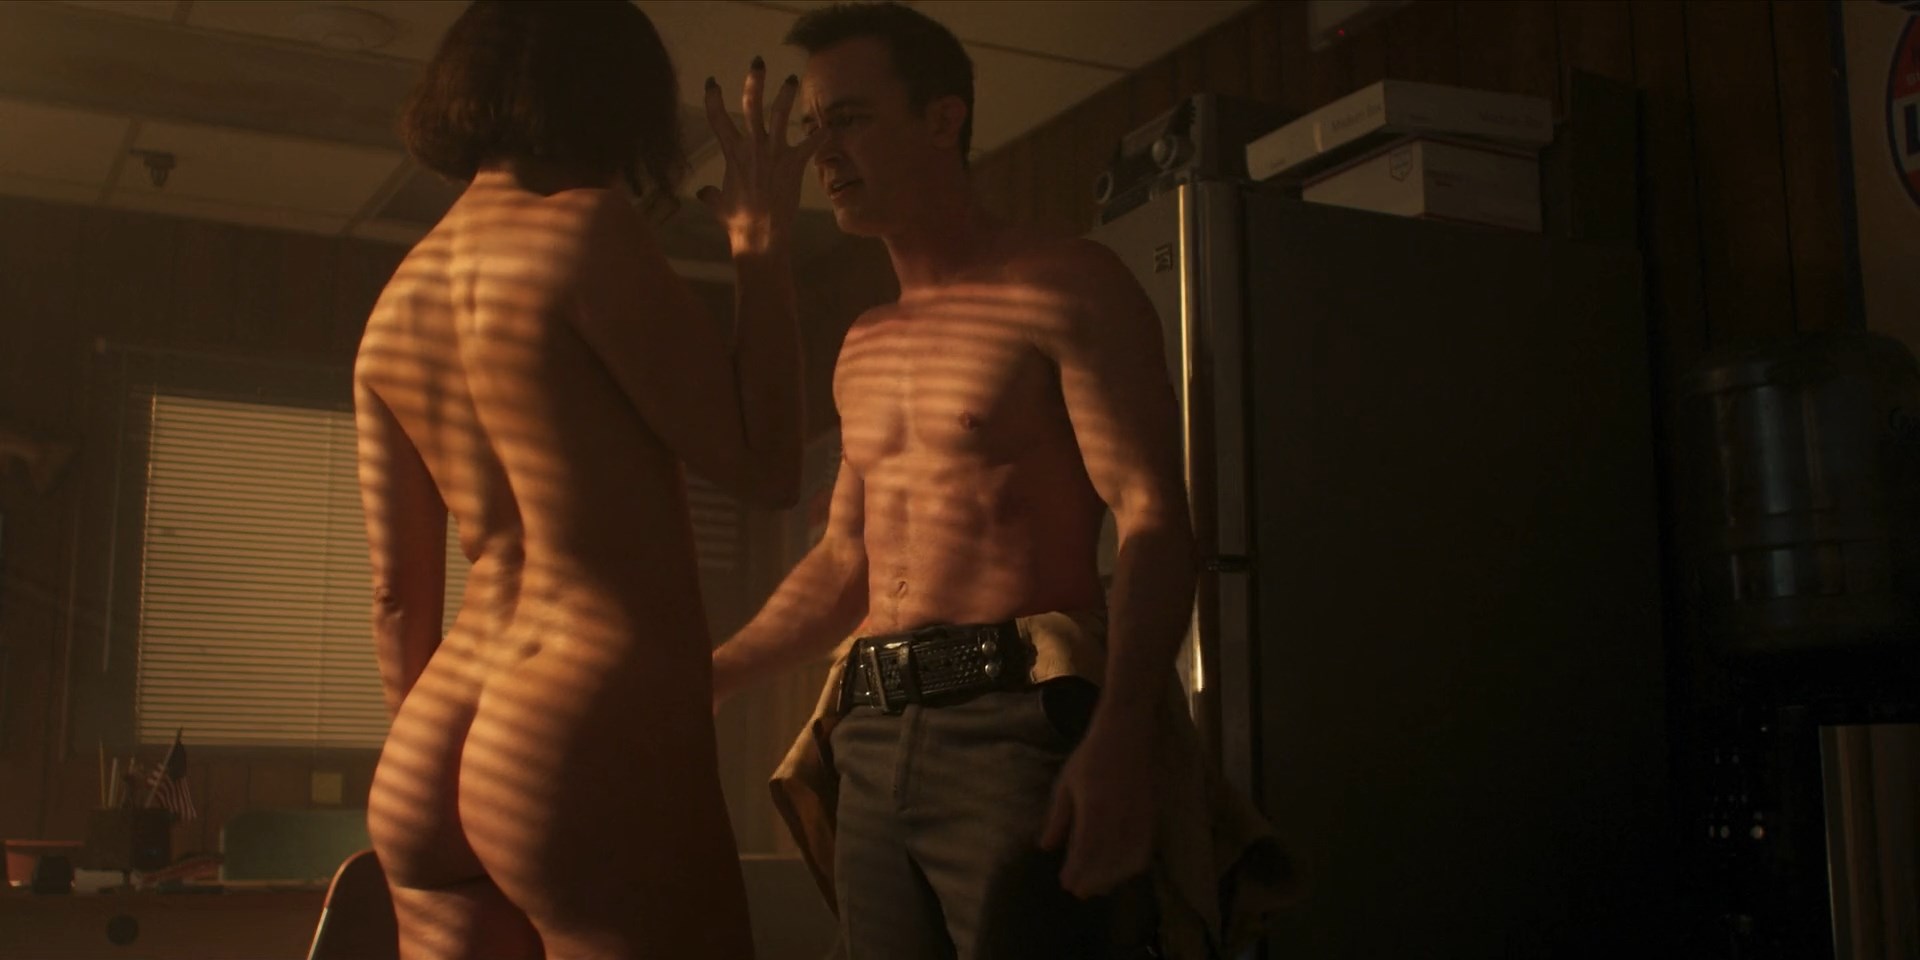 connor pope share crystal reed nude photos